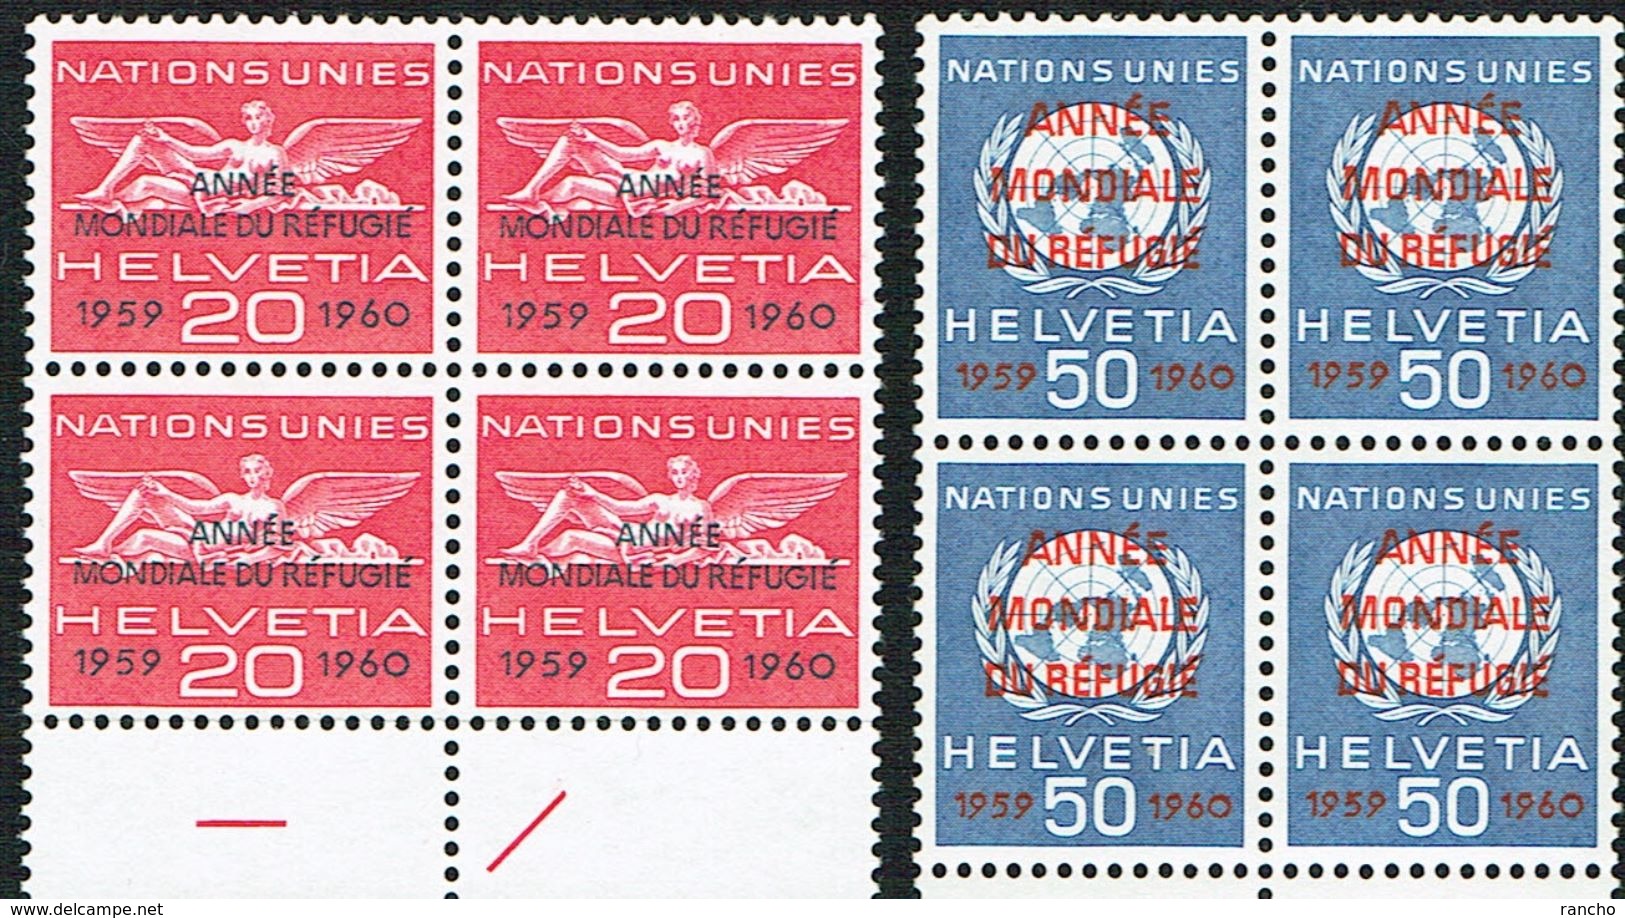 **.O.N.U. BLOCS DE 4 TIMBRES COLLECTIONS NEUFS A/GOMME 1960 C/S.B.K. Nr:31/32. Y&TELLIER Nr:408/409. MICHEL Nr:31/32.** - Officials